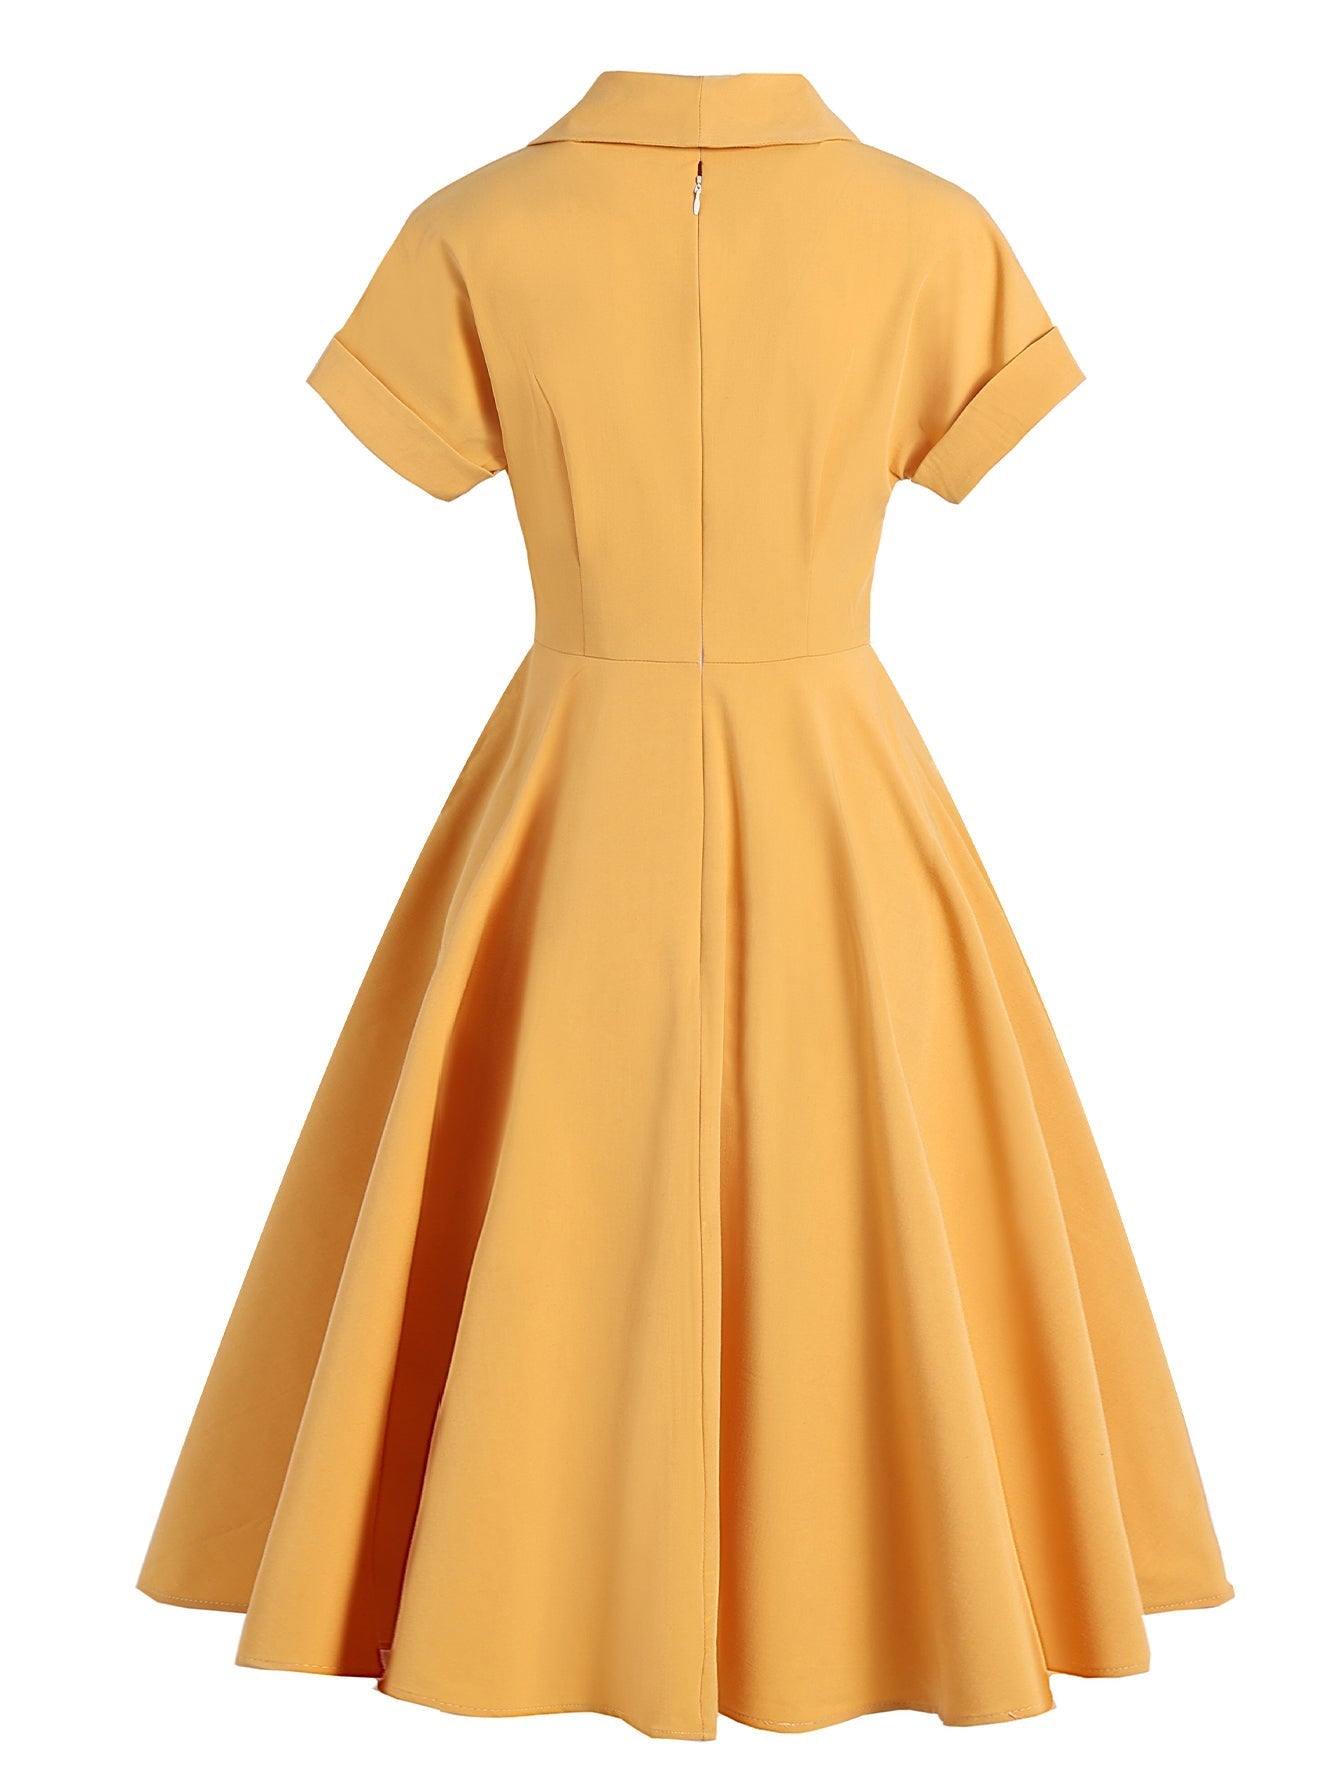 Womens 1950s Retro Rockabilly Princess Cosplay Dress  50's 60's Party Costume Gown(S-2XL) Sai Feel